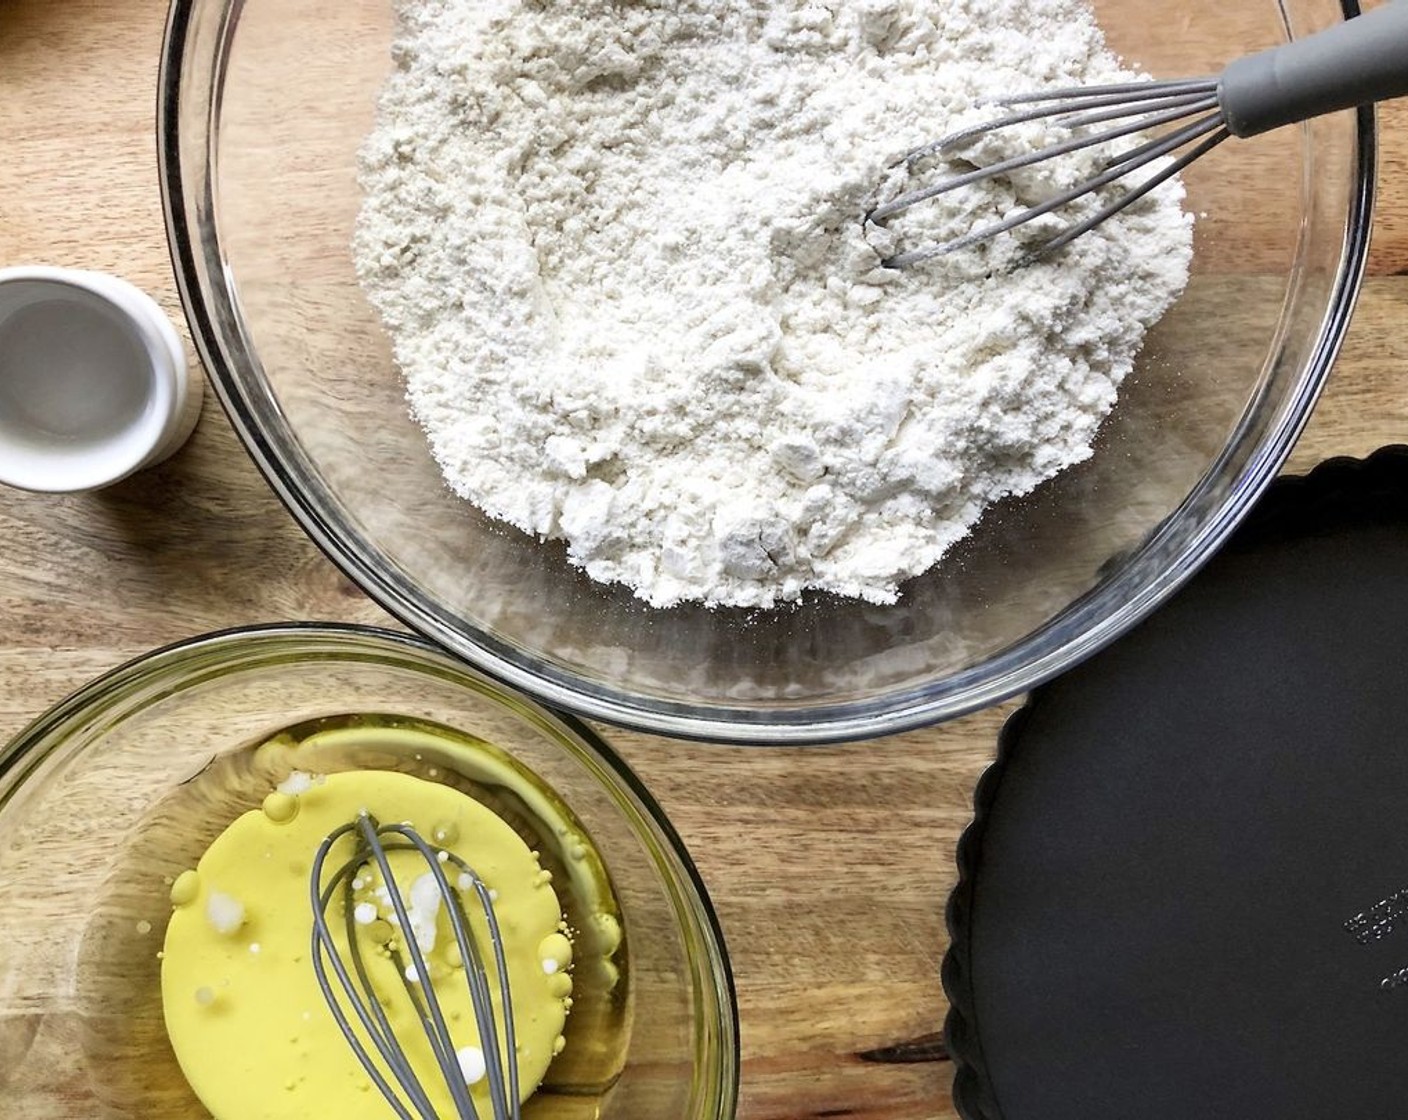 step 2 In a mixing bowl, stir together All-Purpose Flour (1 1/2 cups), Kosher Salt (1/2 tsp), and Granulated Sugar (1 tsp). Stirring enables the salt and sugar to sift the flour, so you don’t need to sift it in advance. In a small bowl, whisk together the Vegetable Oil (1/4 cup), Olive Oil (1/4 cup), Whole Milk (2 Tbsp), and Almond Extract (1 tsp).